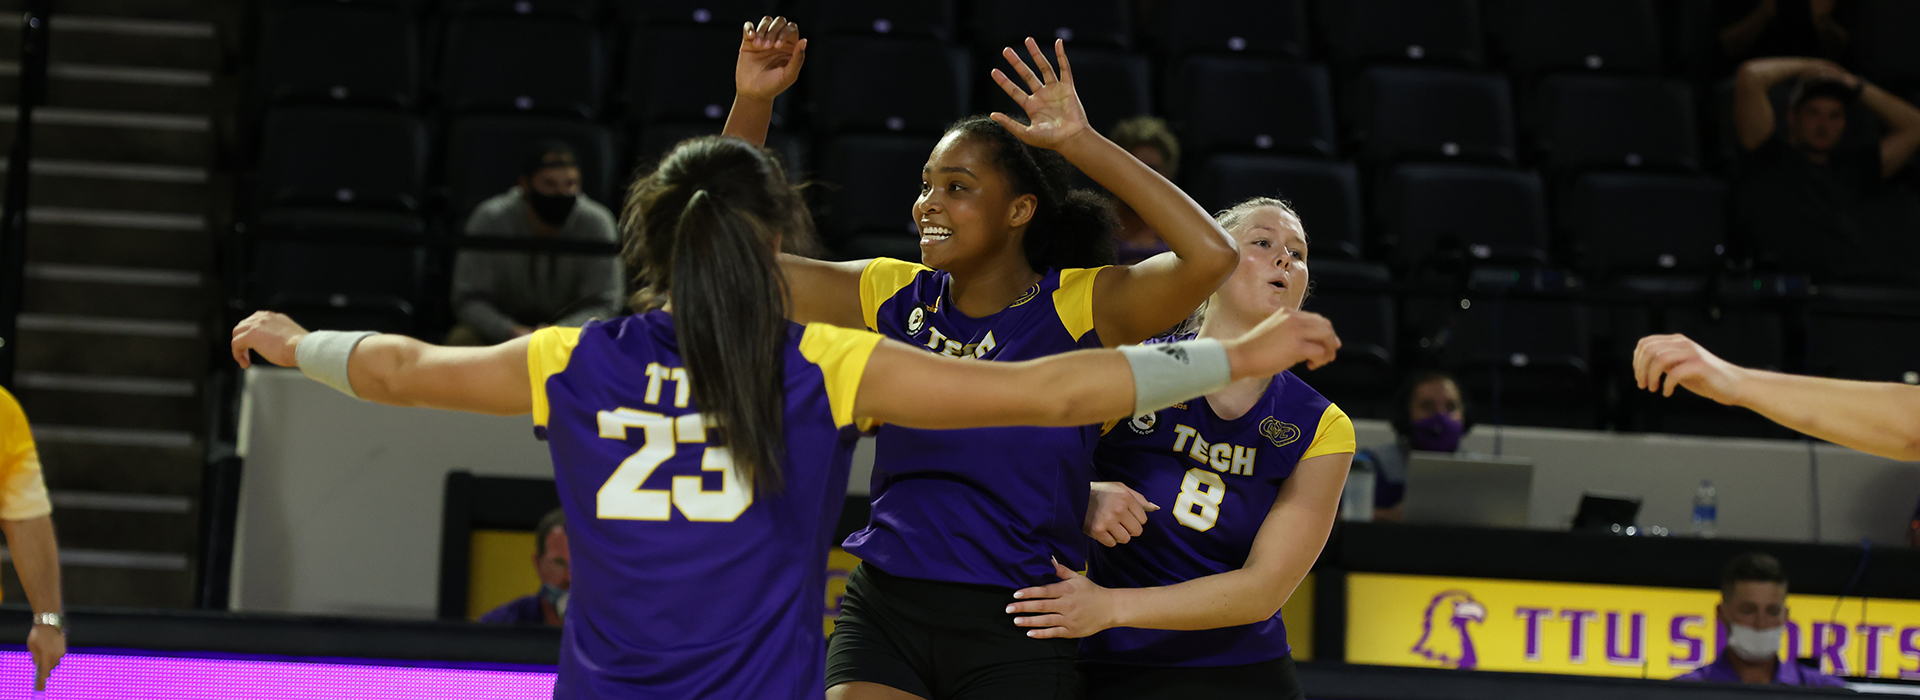 Tech stays unbeaten in OVC play with 3-1 win over Tennessee State